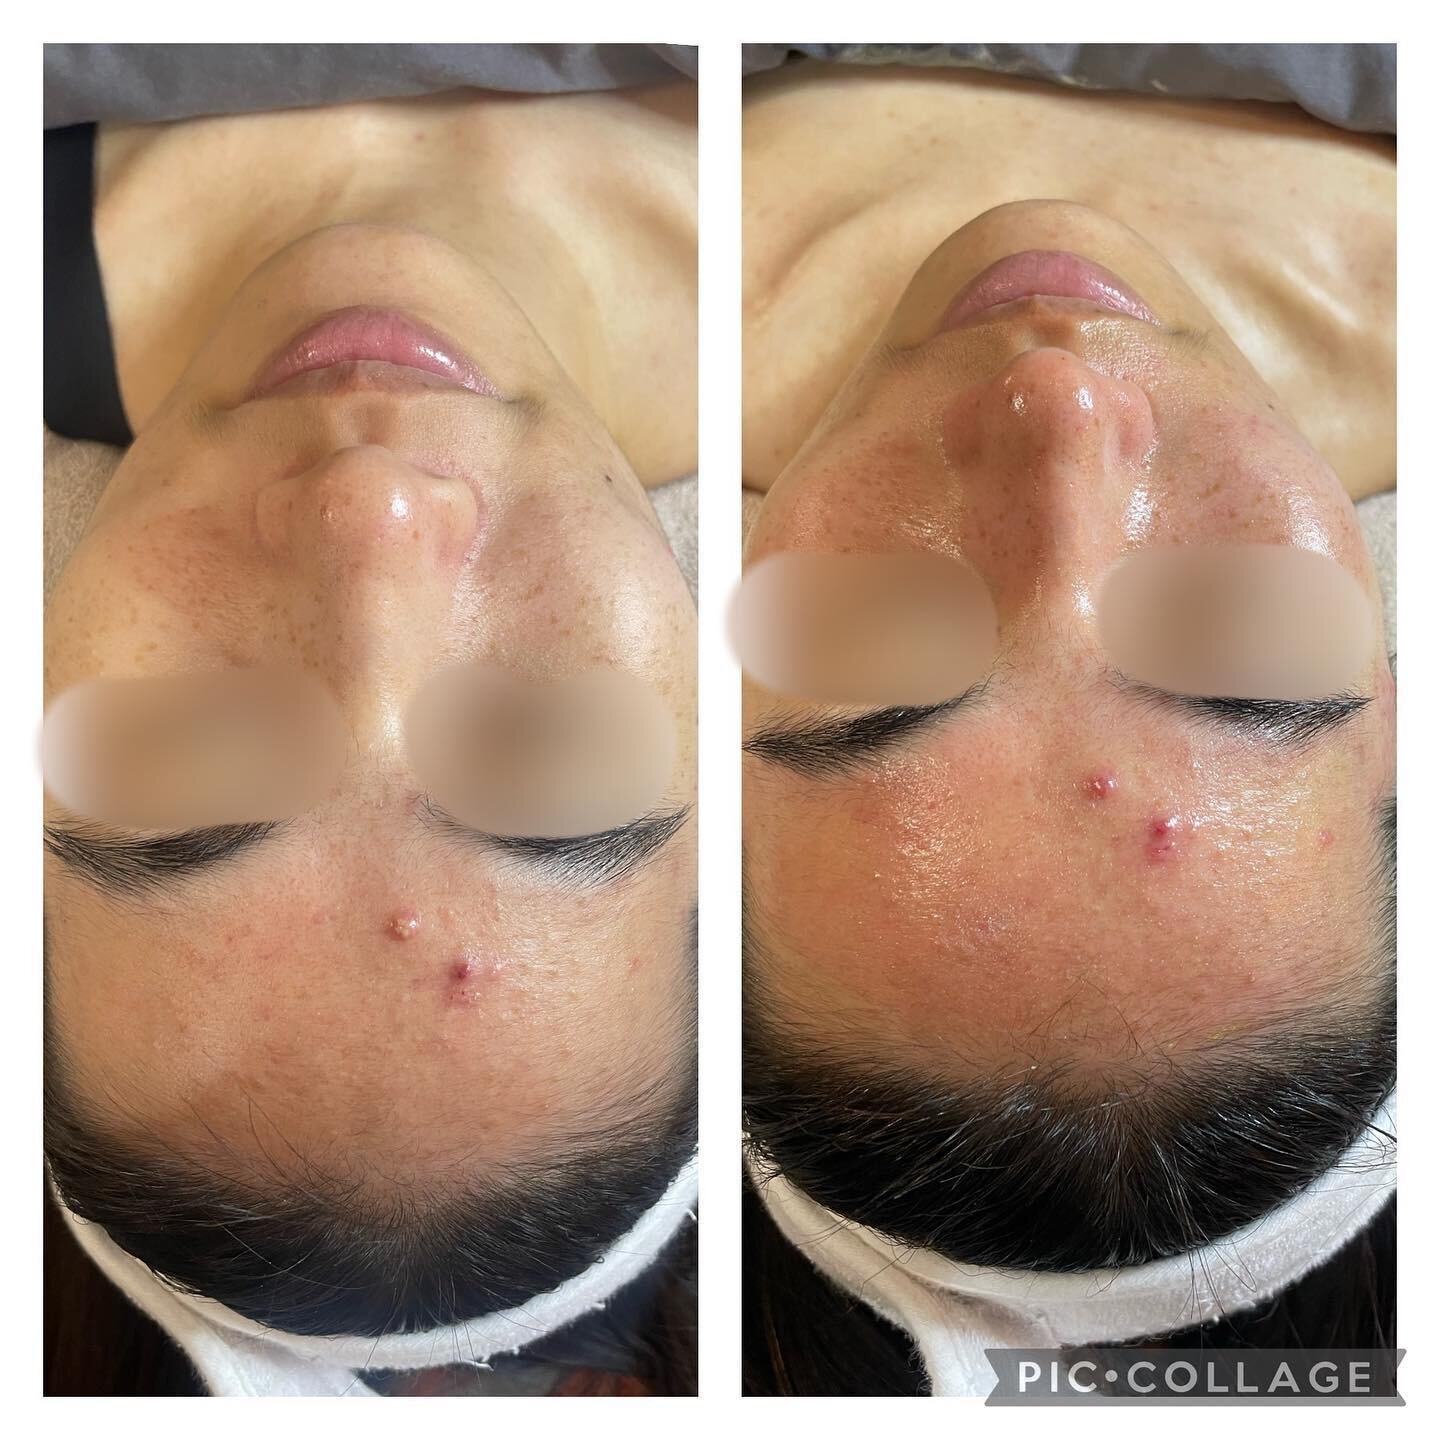 Oxygenating facial before &amp; after! Skin is looking so much more refreshed and vibrant! 🤍💙 @elementalsskincare @skinmoderne #elementals #facial #oxygenating